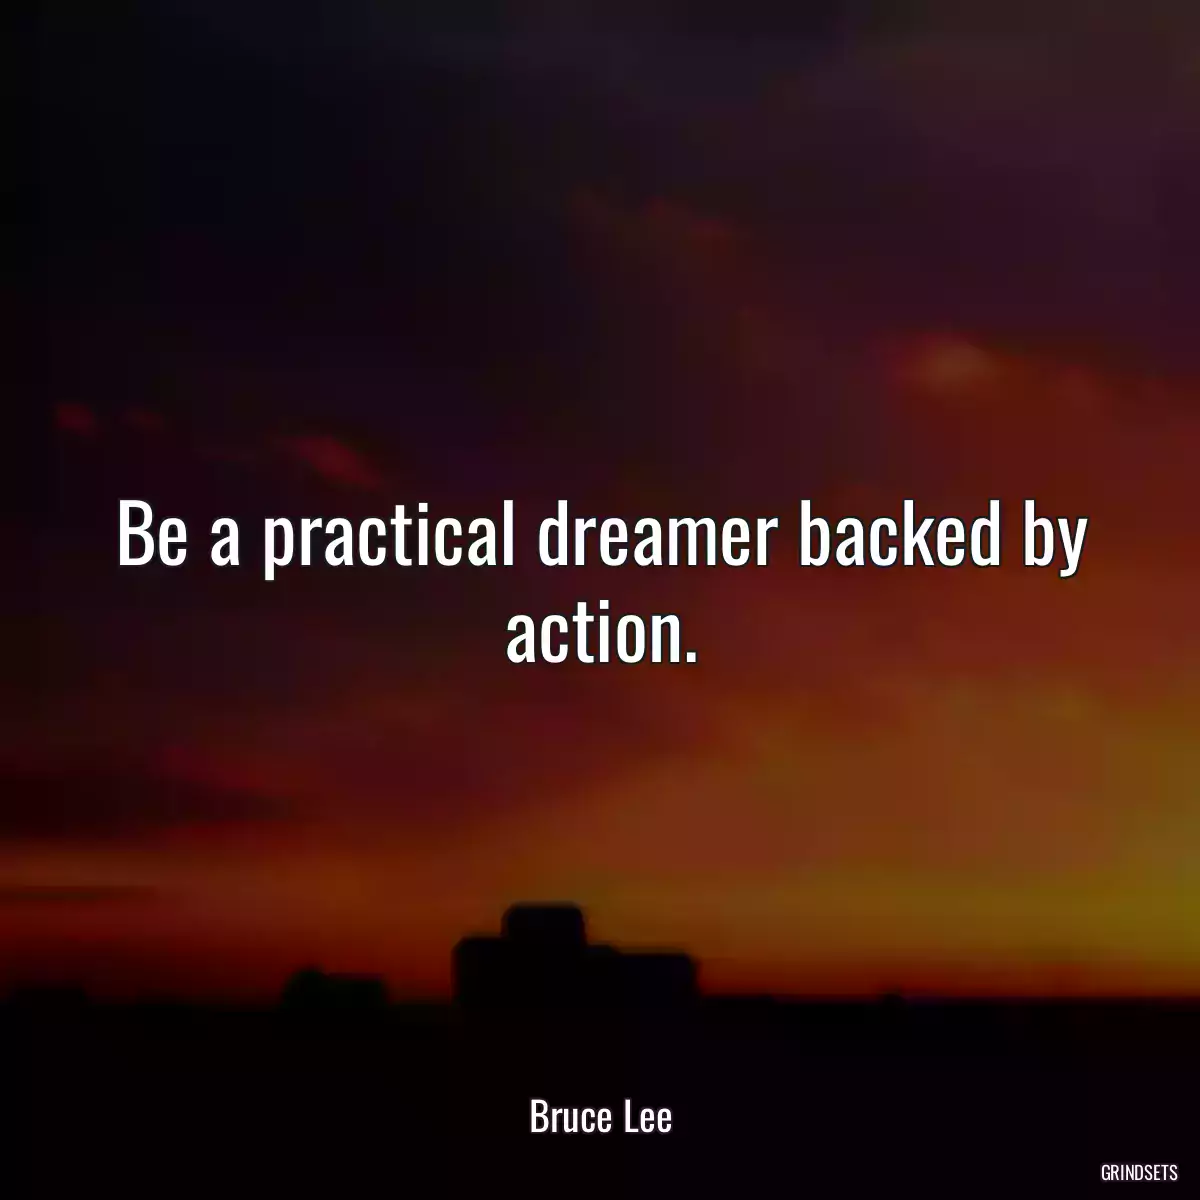 Be a practical dreamer backed by action.